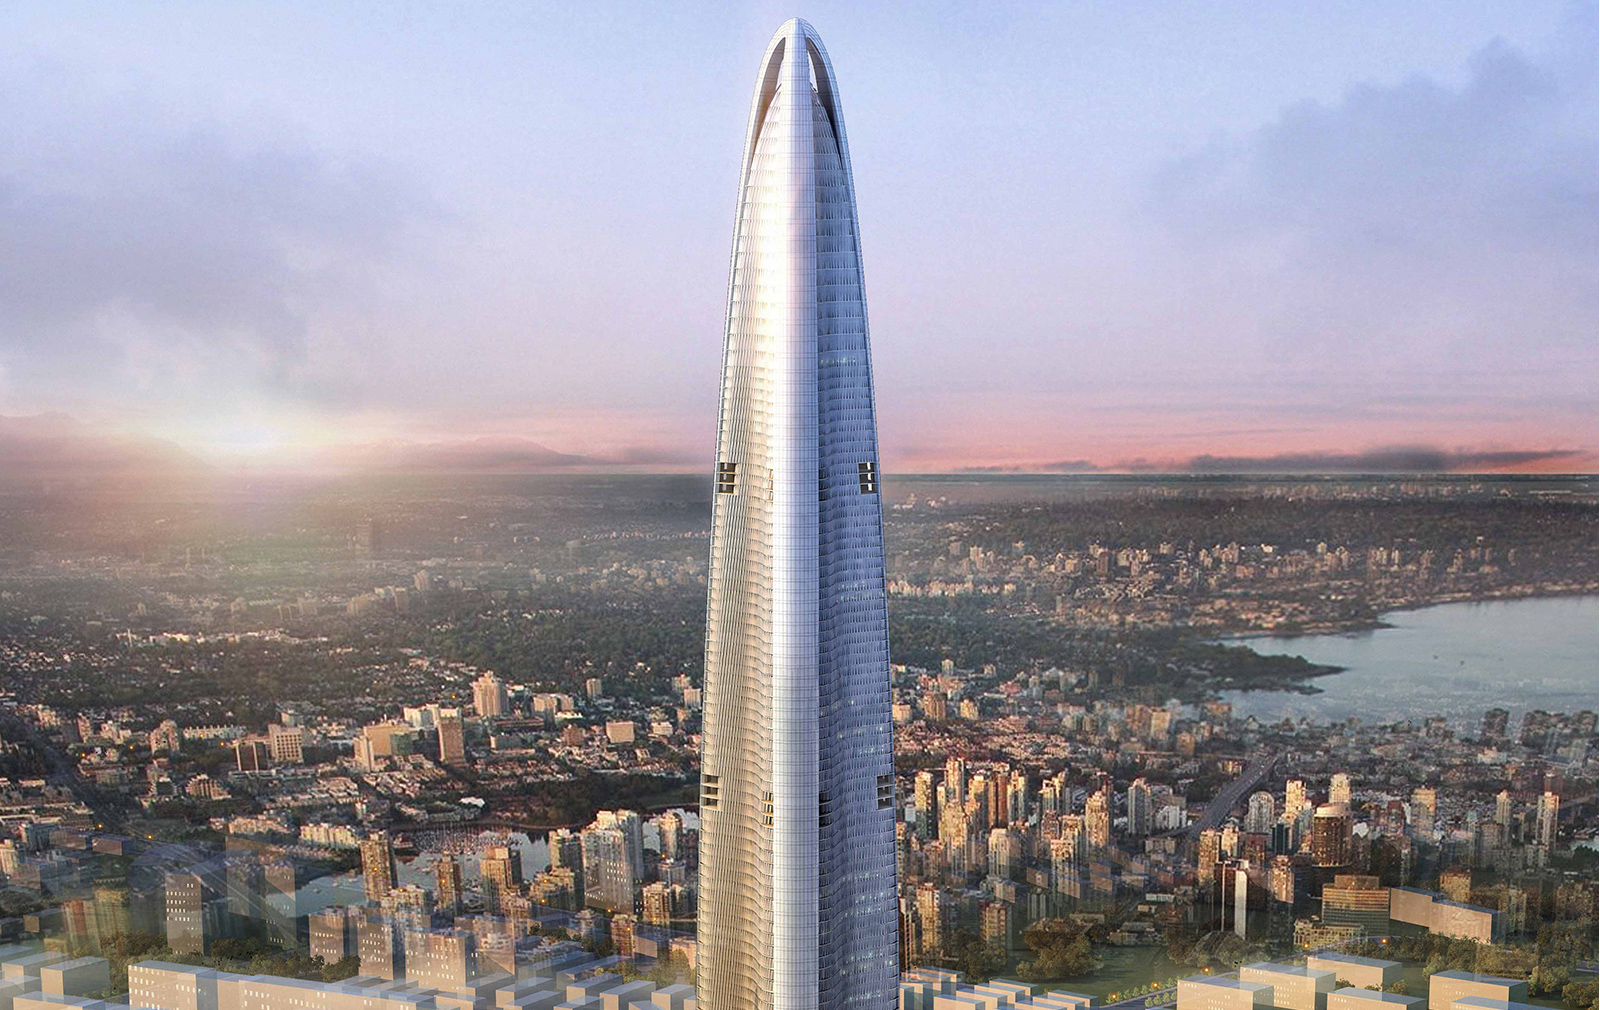 Tallest buildings topping out in 2017 - Wuhan Greenland Center